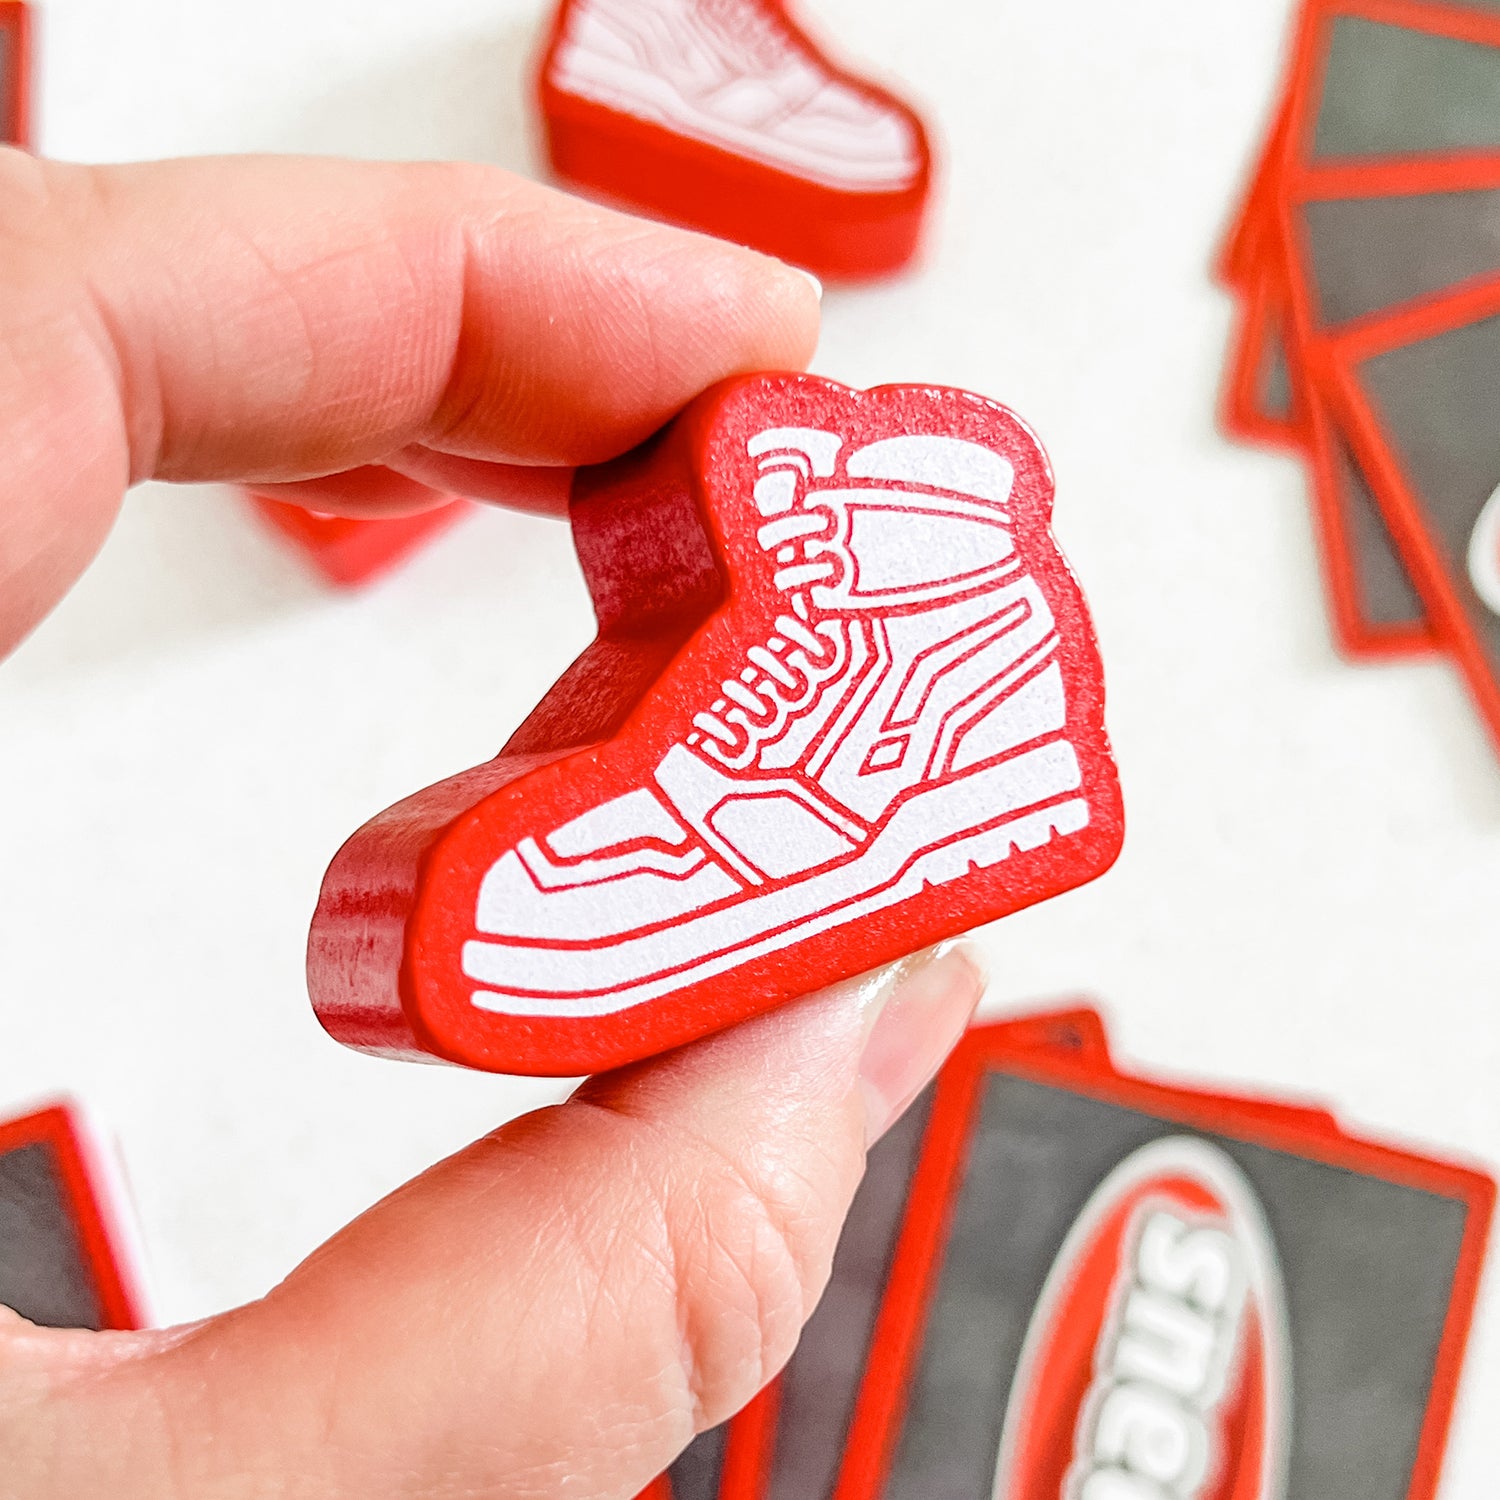 Sneaks by SimplyFun is a a quick thinking and decision making game featuring cute wooden sneakers.